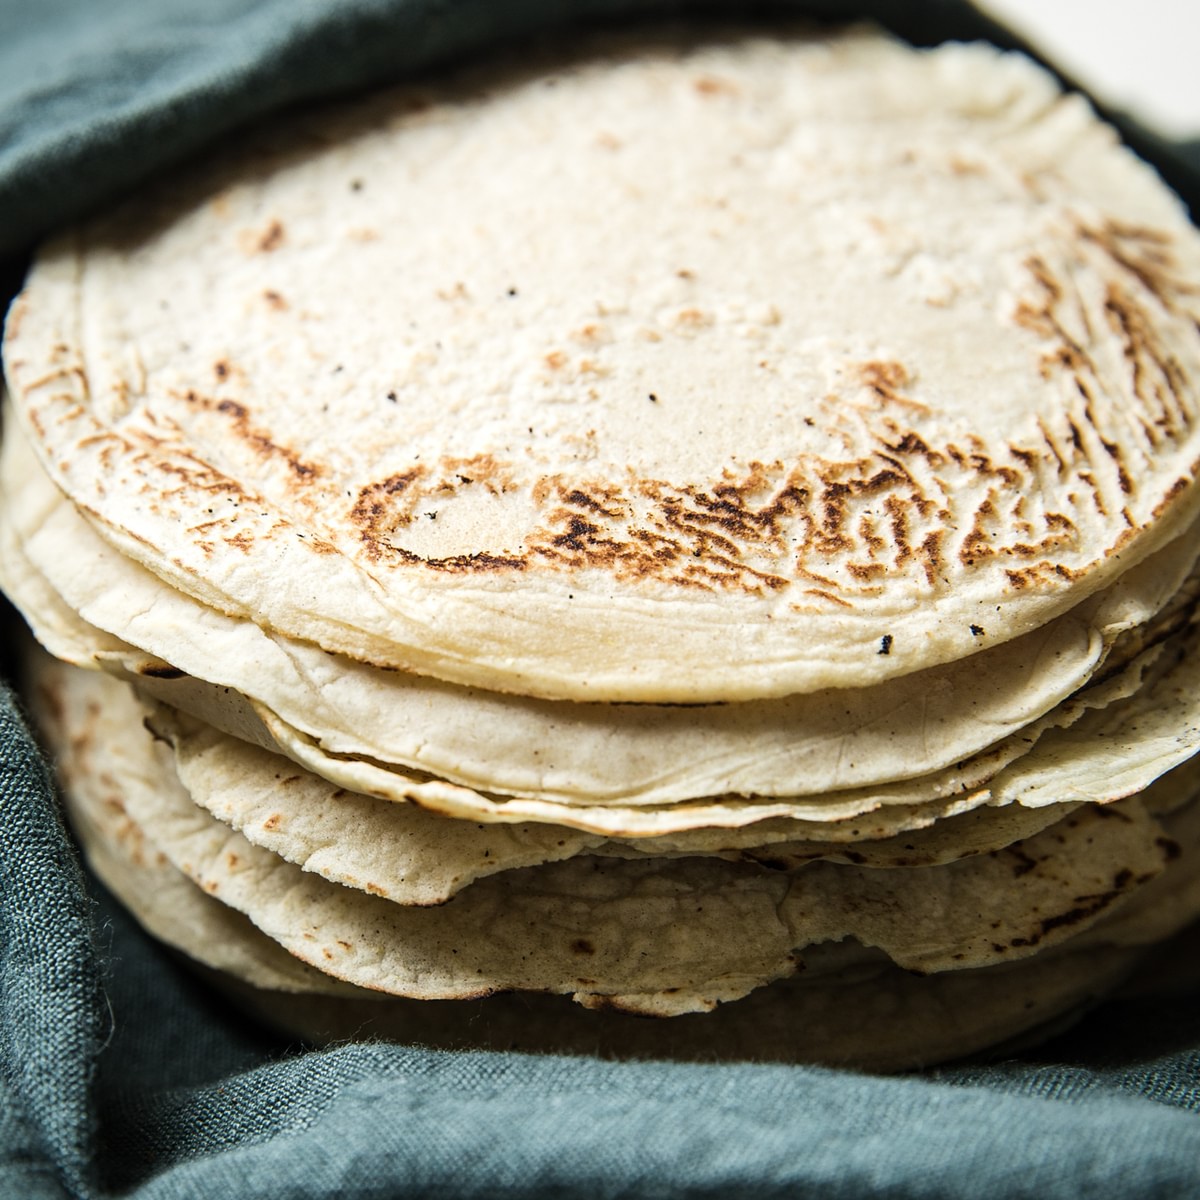 Homemade corn tortillas wrapped in a towel